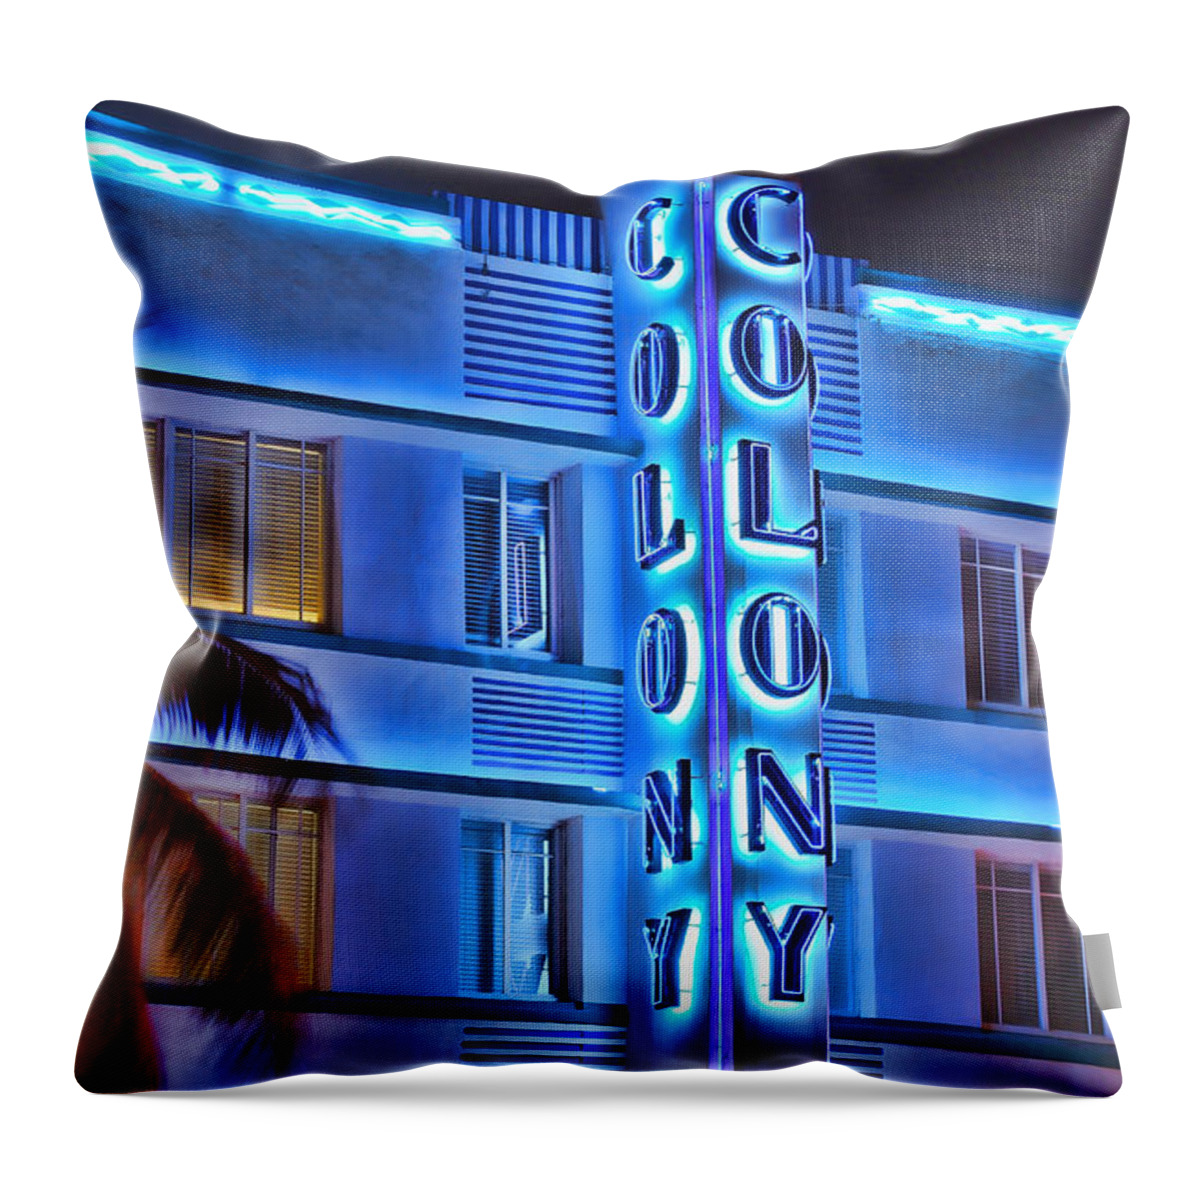 Colony Throw Pillow featuring the photograph The Colony by Carol Eade